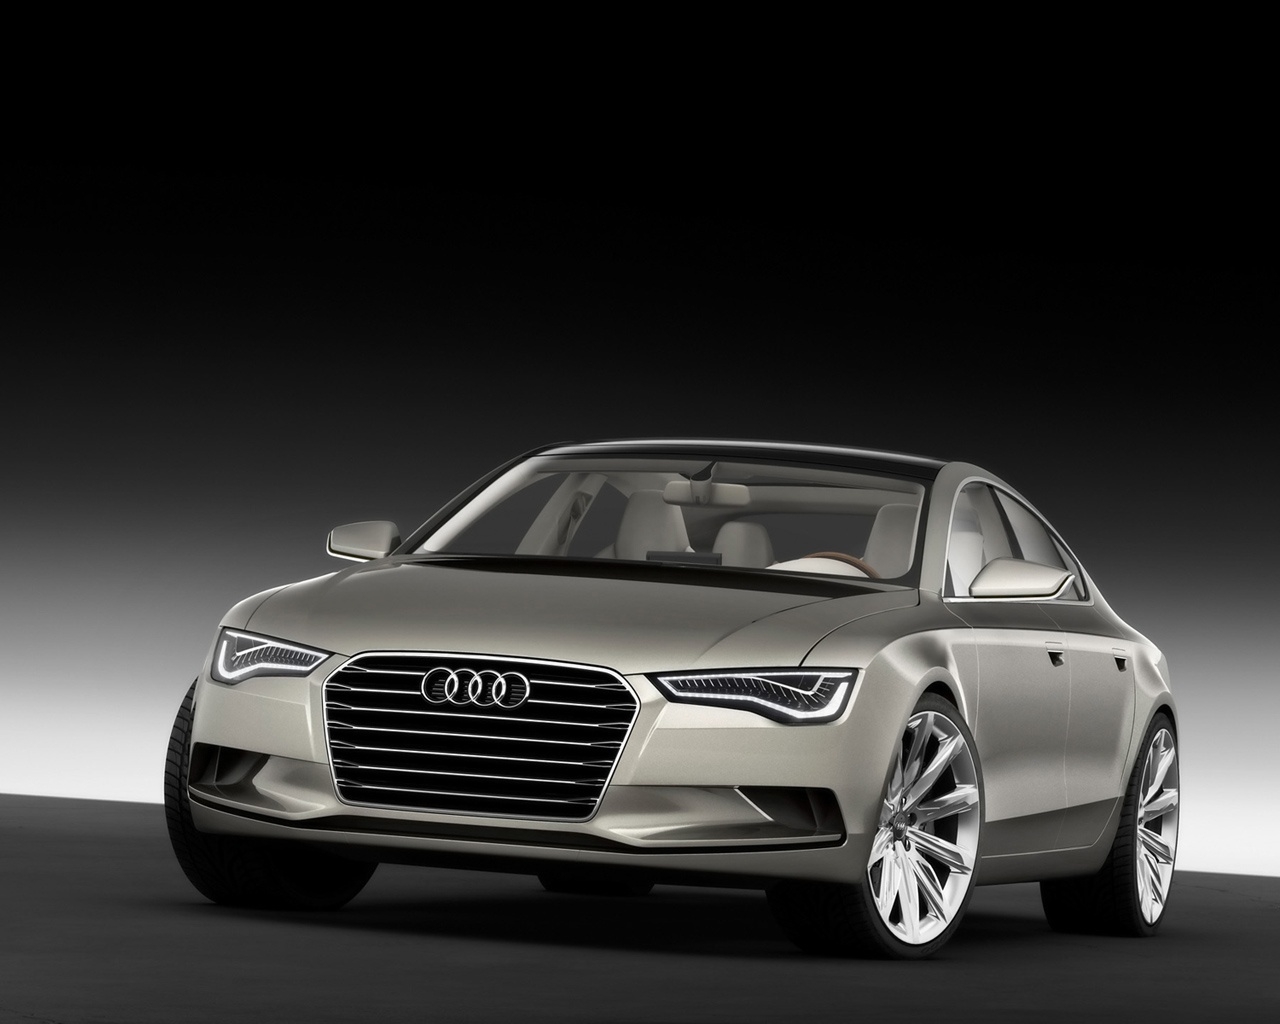 2009 Audi Sportback Concept - Front Angle for 1280 x 1024 resolution